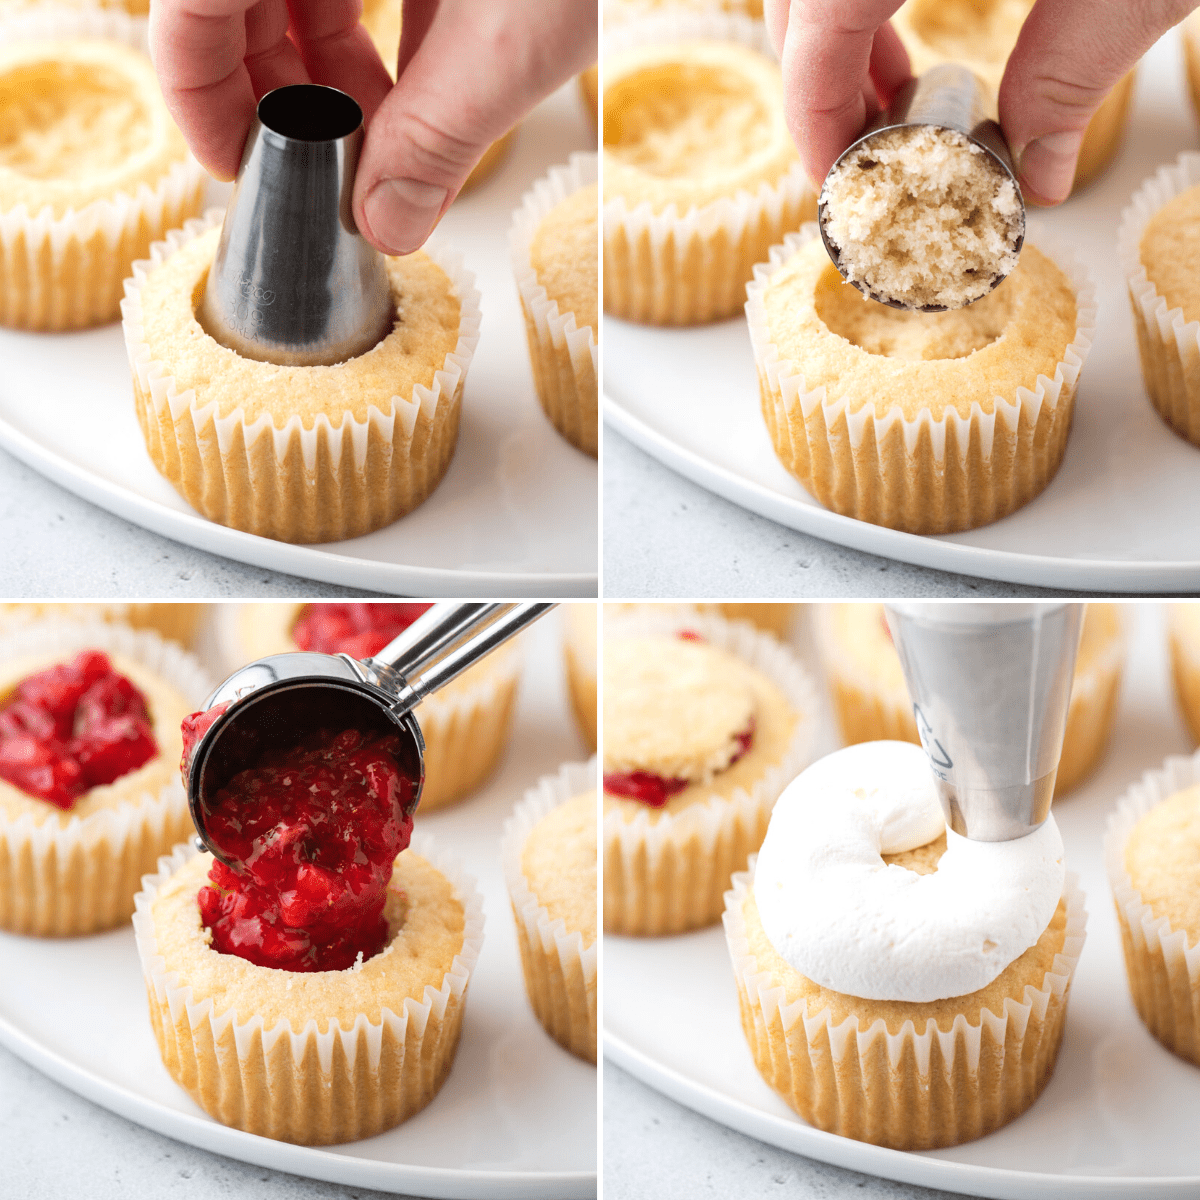 Four photos showing process of filling and topping strawberry shortcake cupcakes